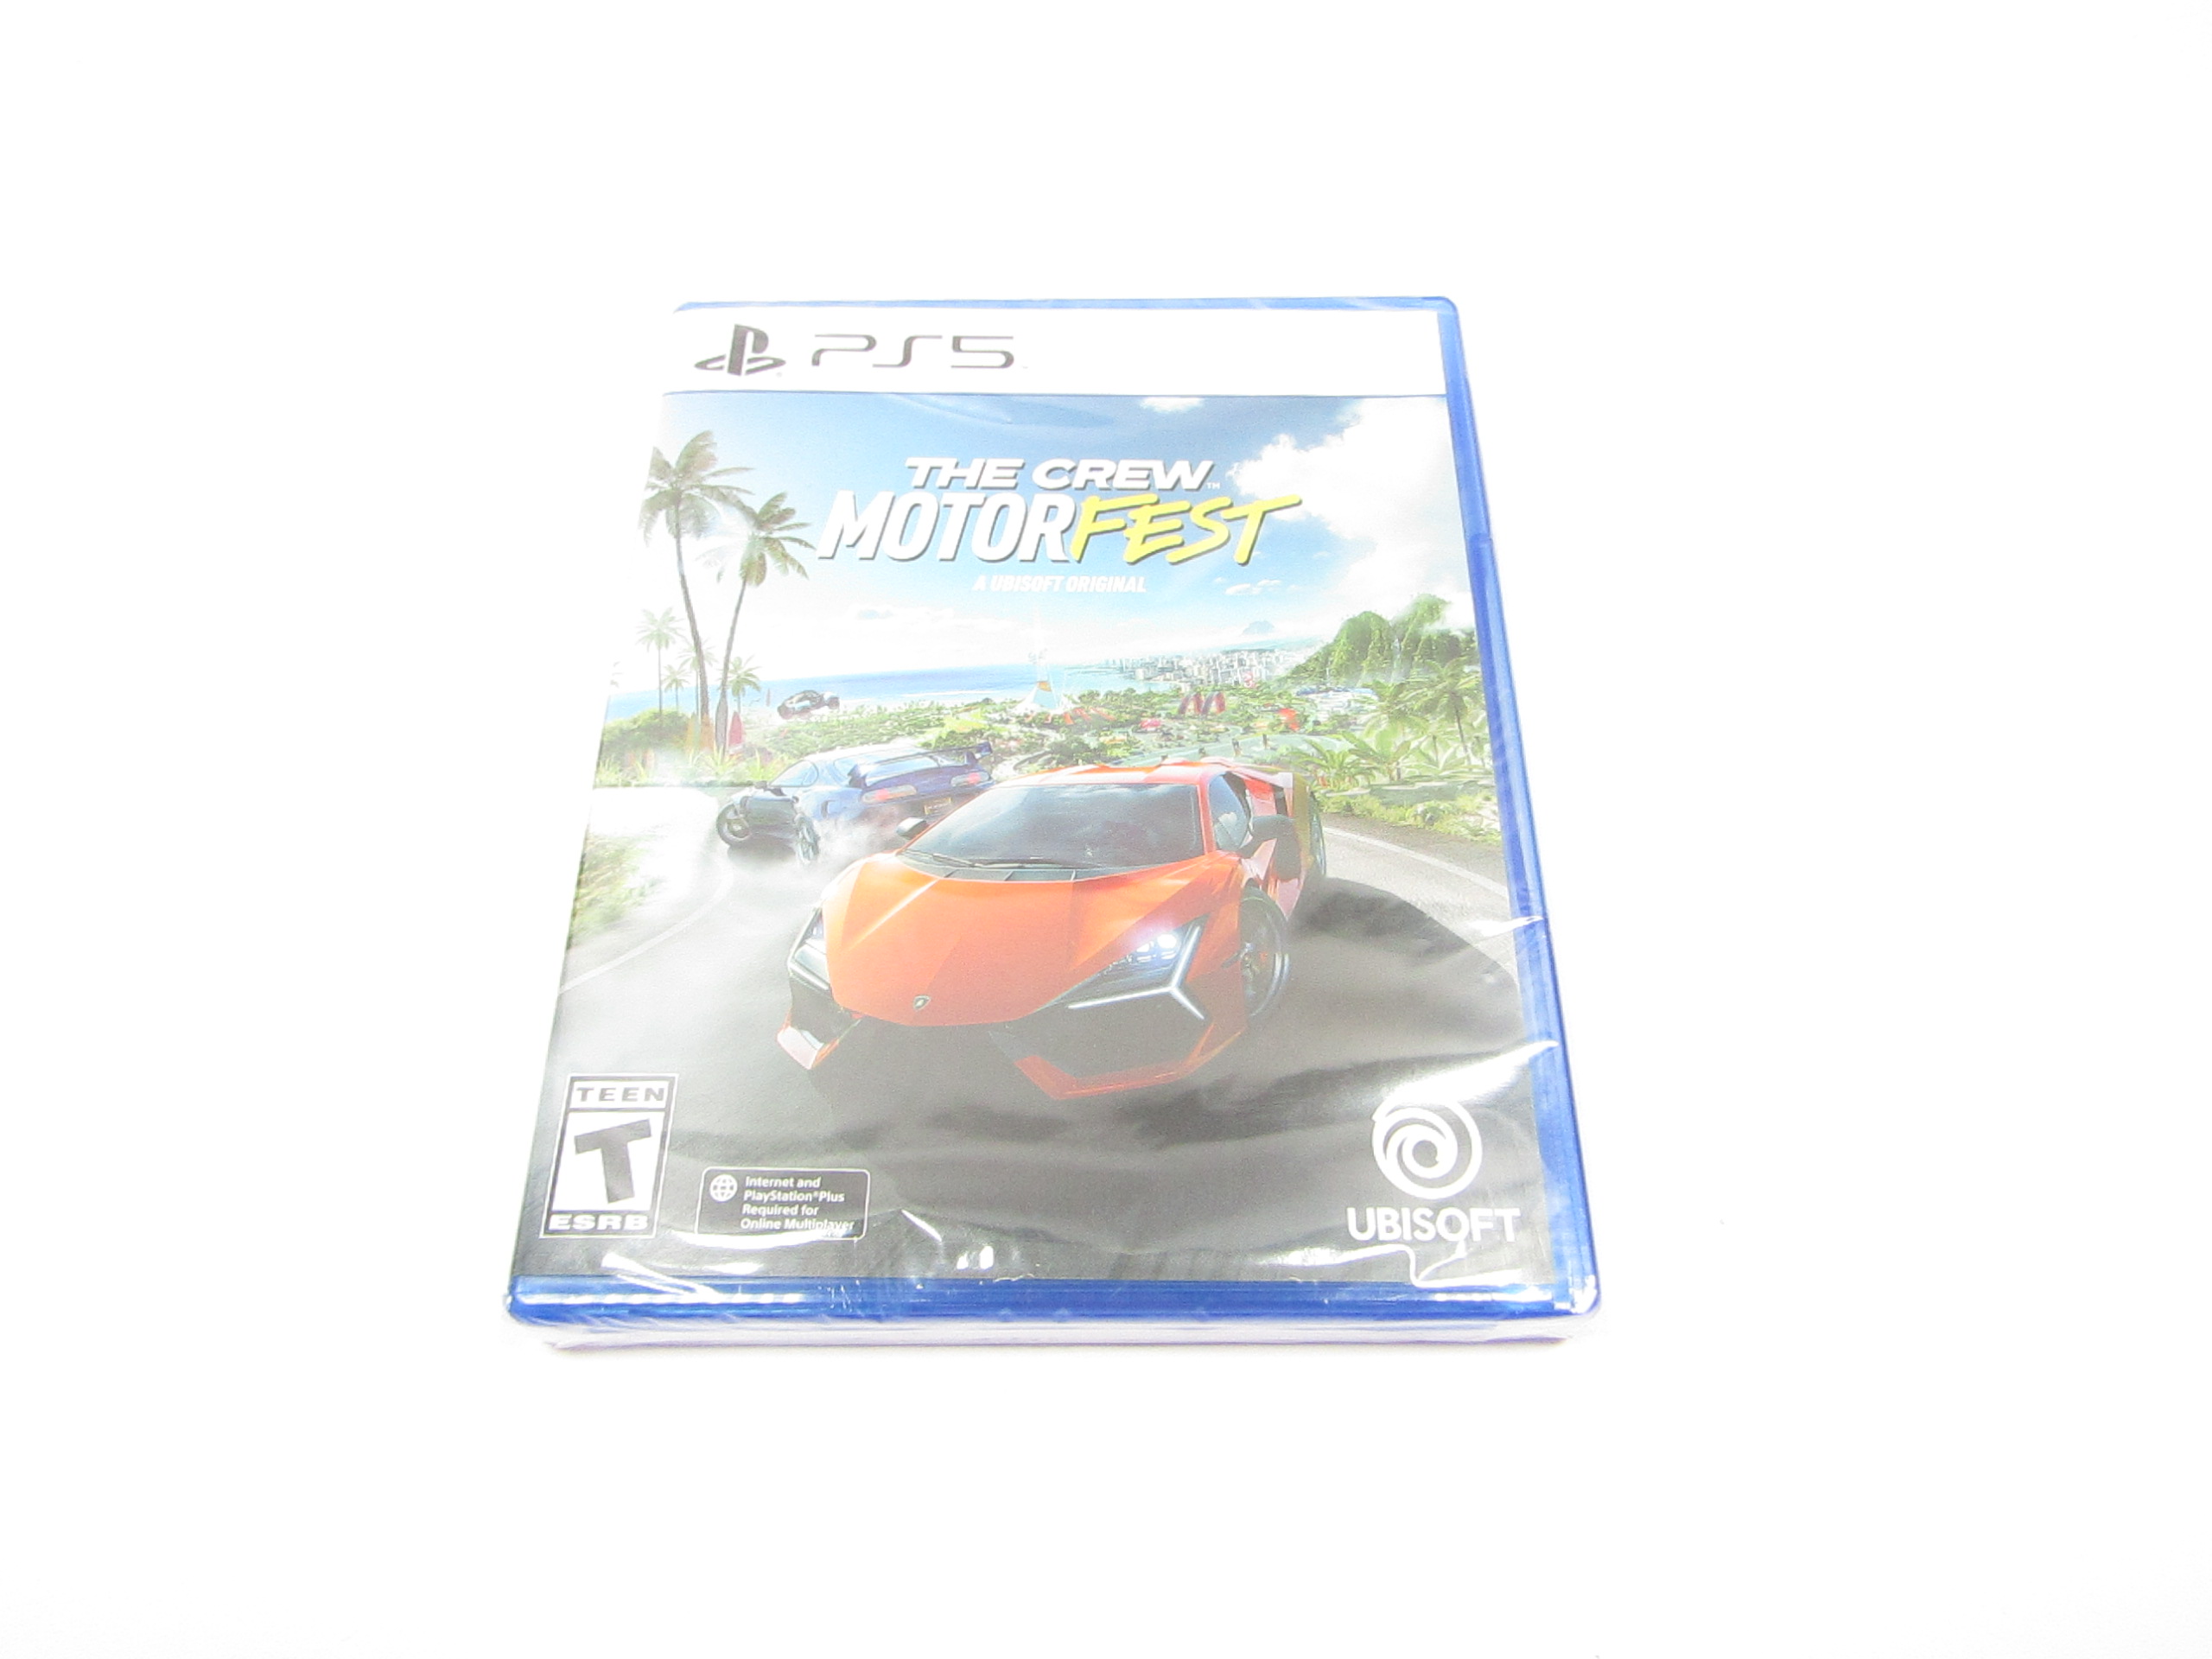 Ubisoft The Crew Motor Fest PlayStation 5 Video Game